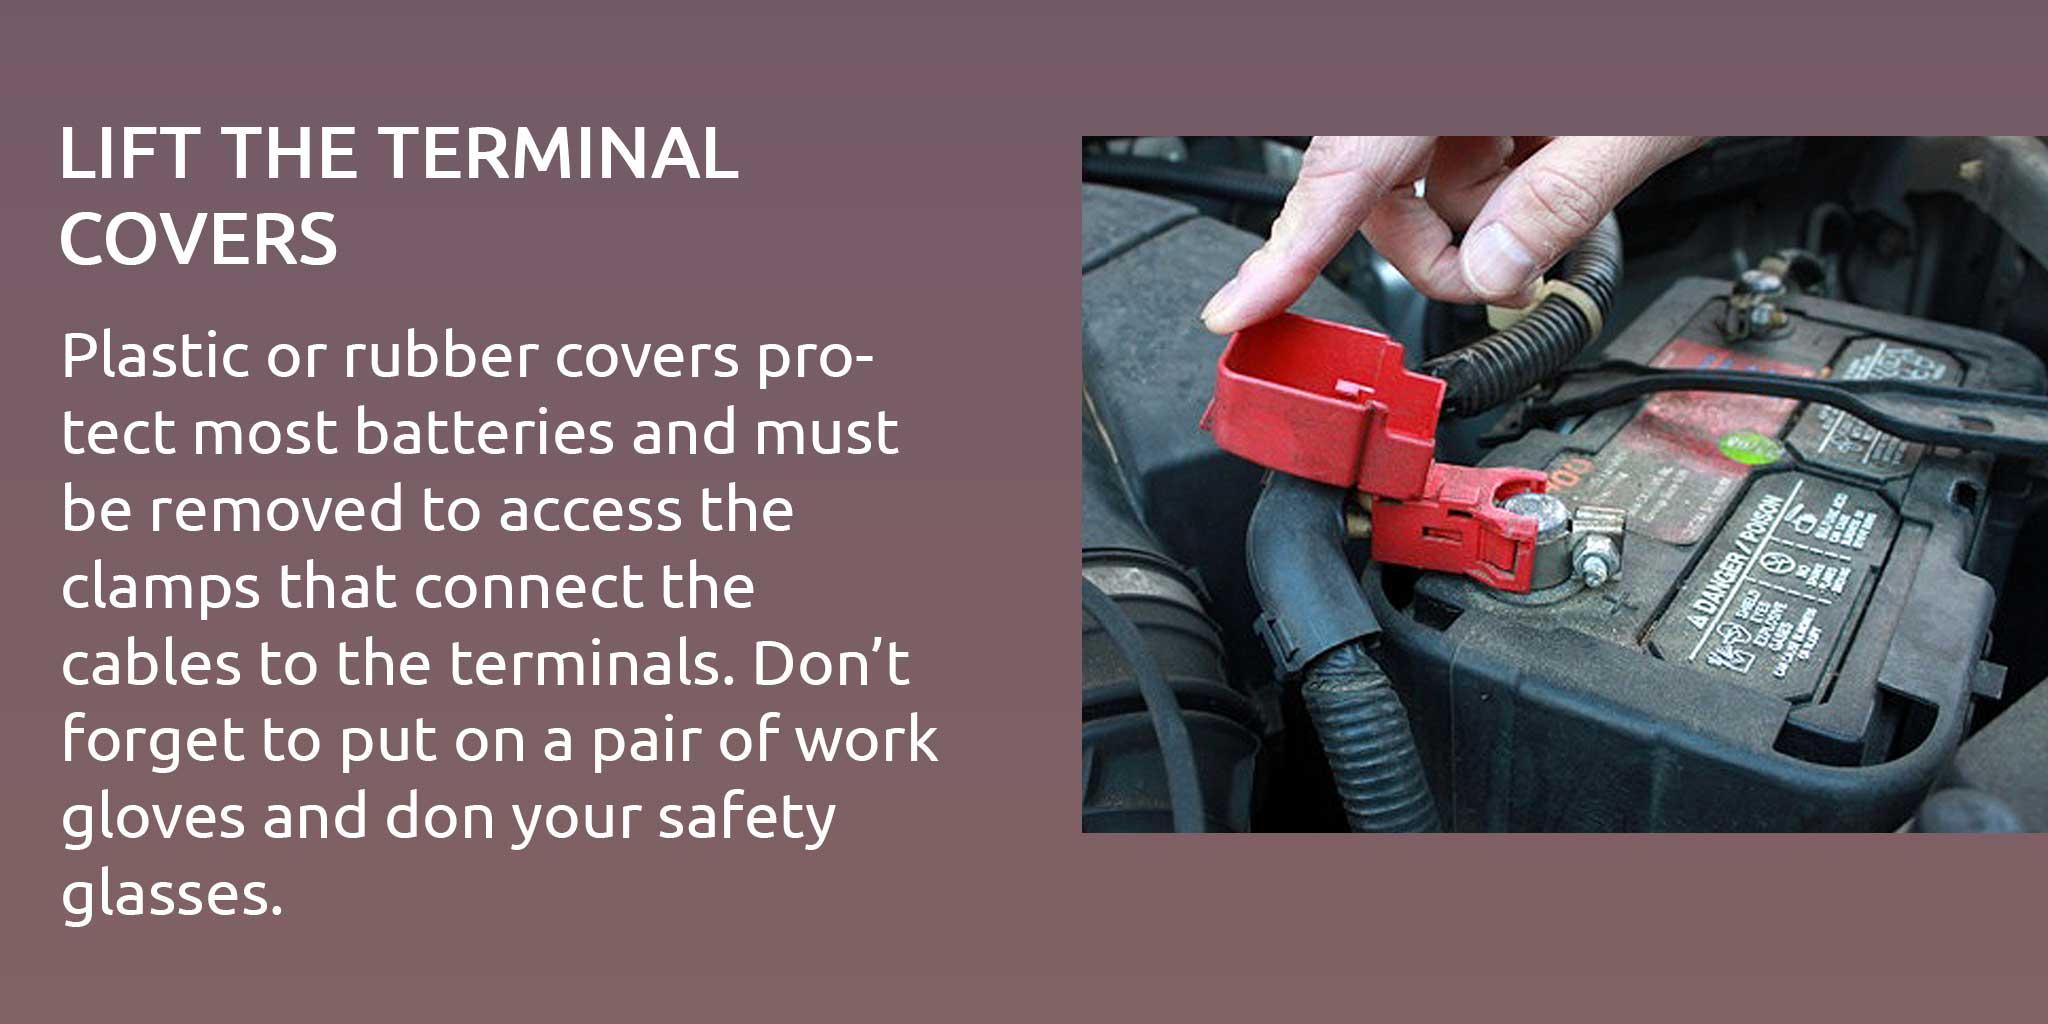 Plastic or rubber covers protect most batteries and must be removed to access the clamps that connect the cables to the terminals. Don’t forget to put on a pair of work gloves and don your safety glasses.